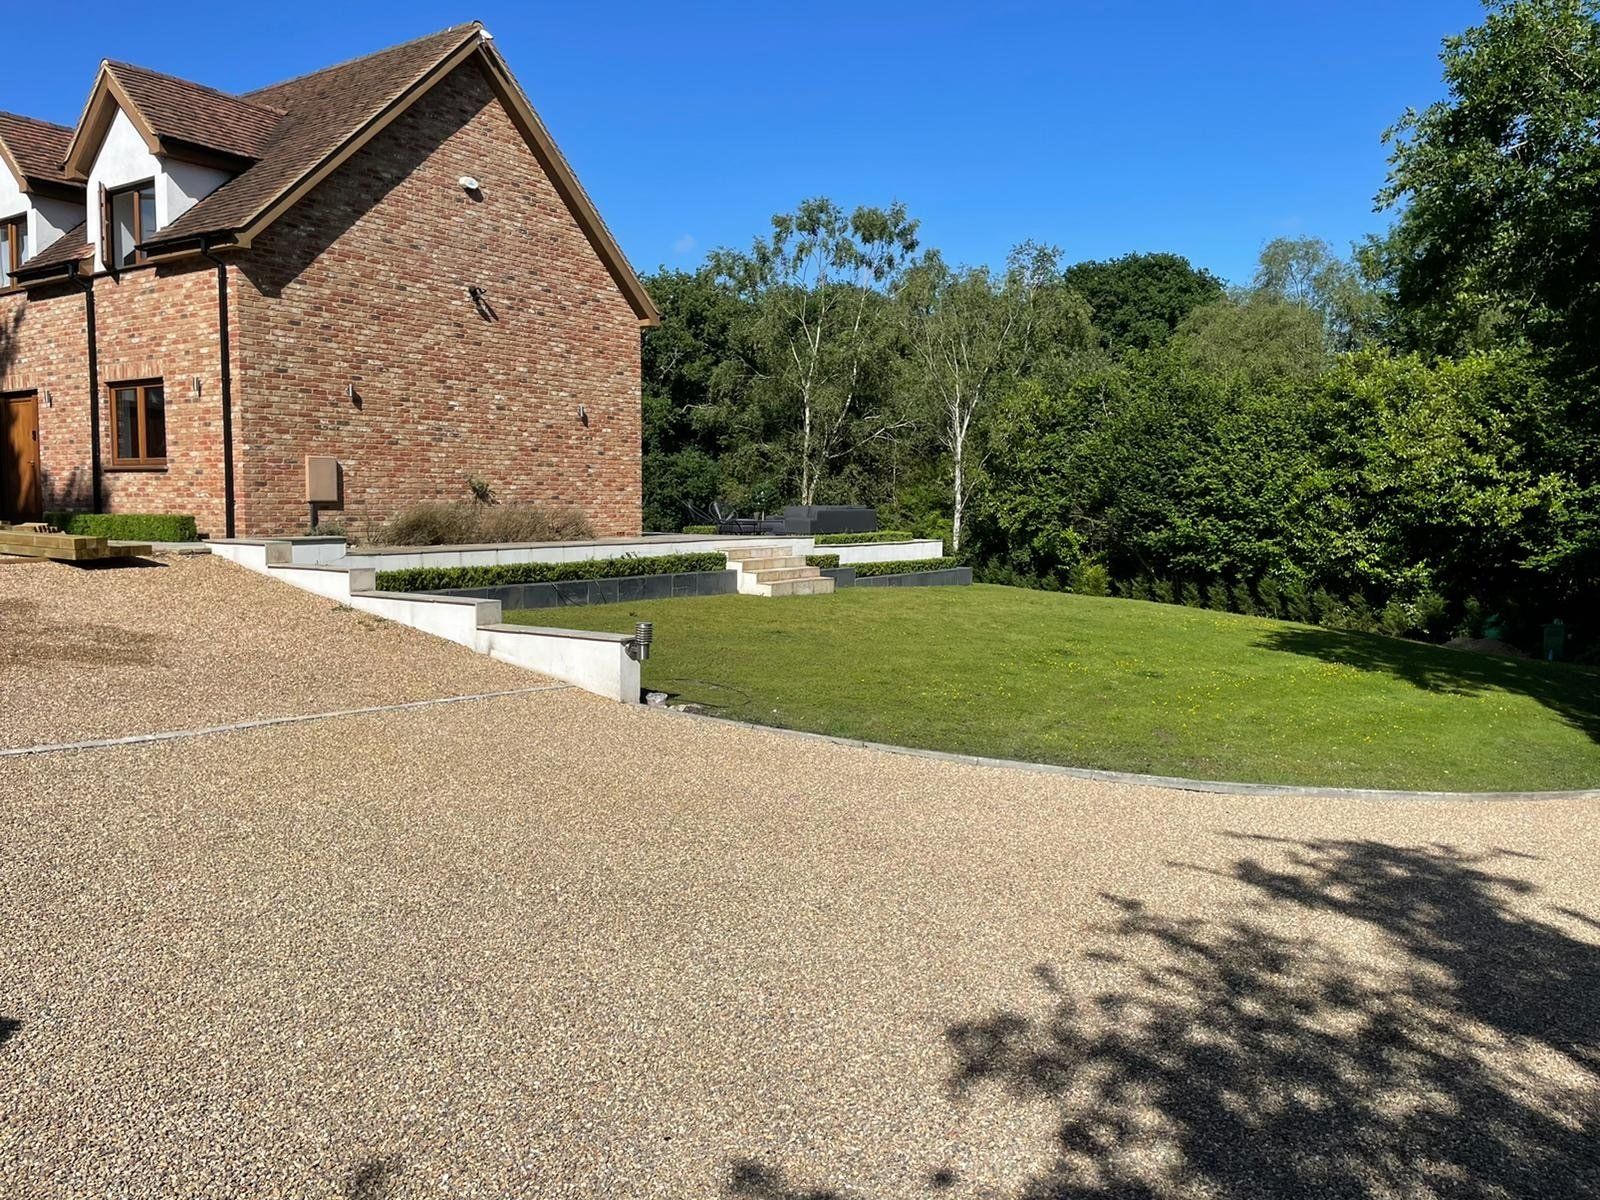 A large brick house with a gravel driveway in front of it.